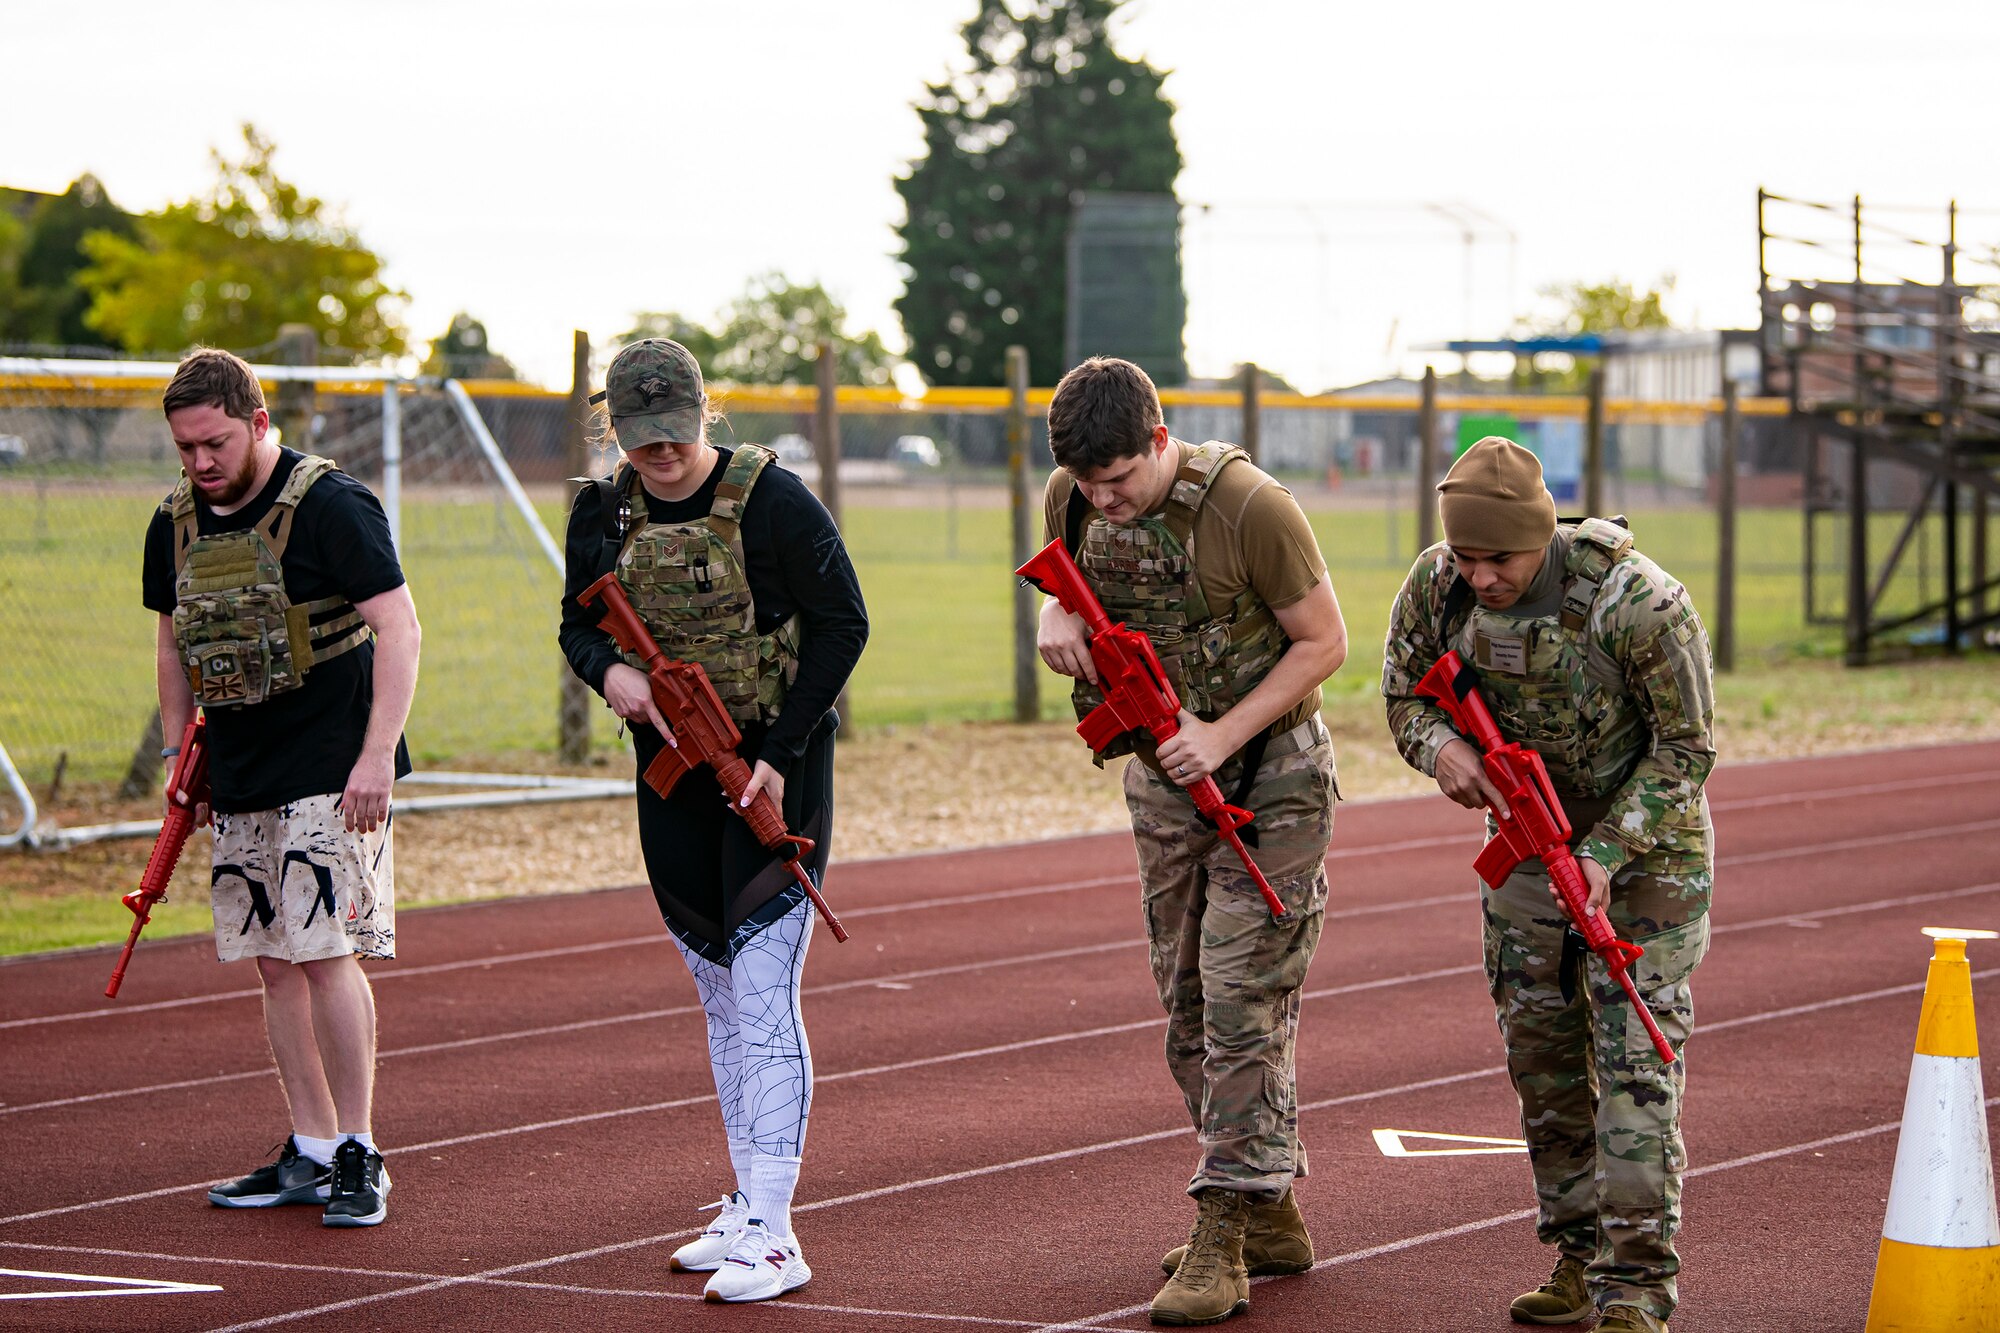 Participants from the 423rd Security Forces Squadron prepare to run as part of a defender challenge at RAF Alconbury, England, Oct. 13, 2021.  The challenge was part of National Police Week where defenders paid homage to those who have served as police officers and to honor those that lost their lives in the line of duty. (U.S. Air Force photo by Senior Airman Eugene Oliver)